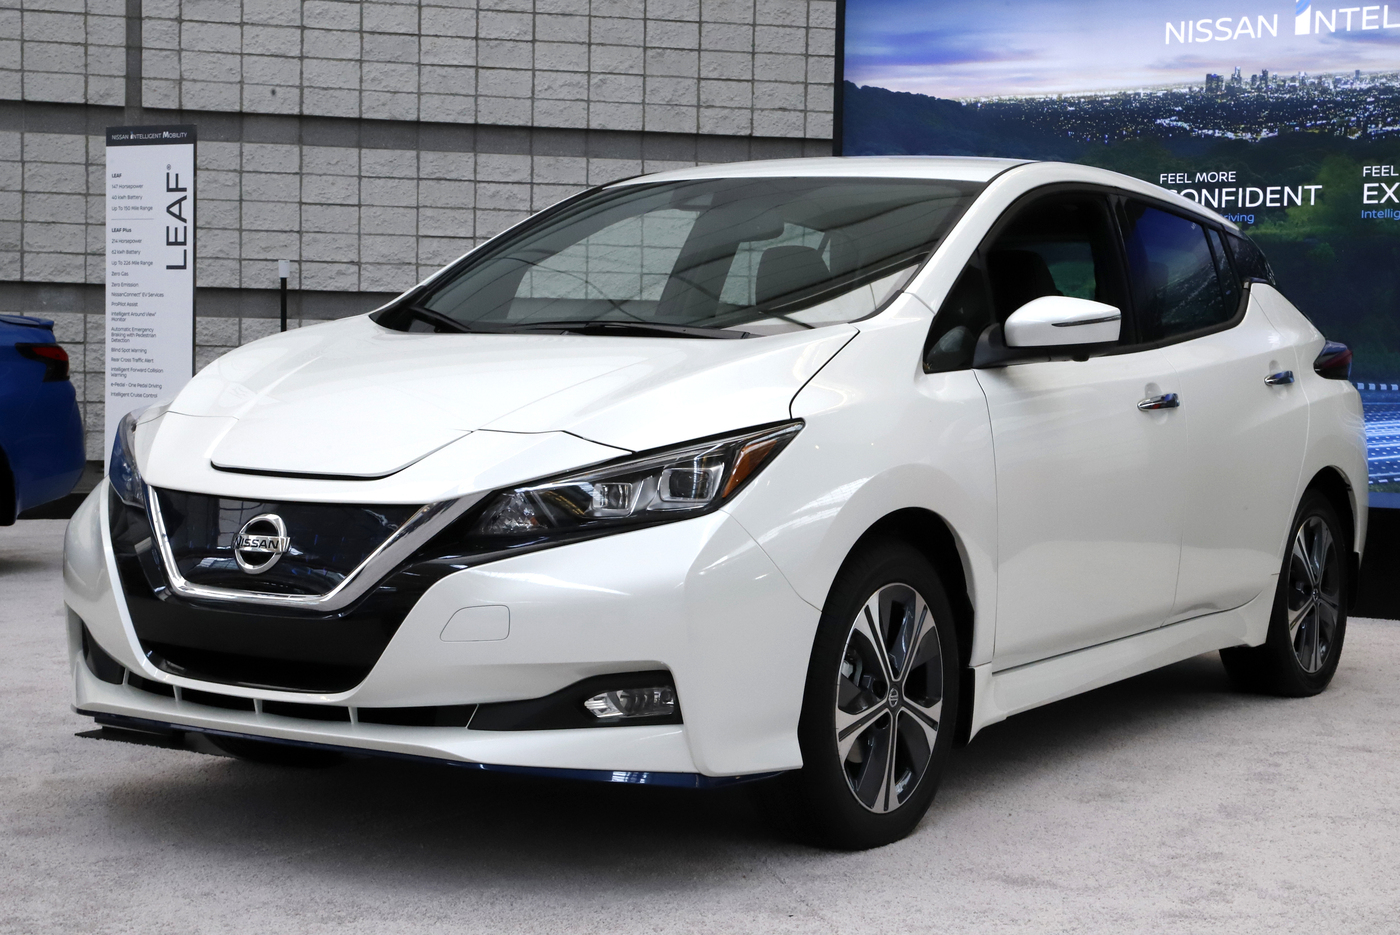 This is the 2020 Nissan Leaf on display at the 2020 Pittsburgh International Auto Show Thursday, Feb.13, 2020 in Pittsburgh. (AP Photo/Gene J. Puskar)